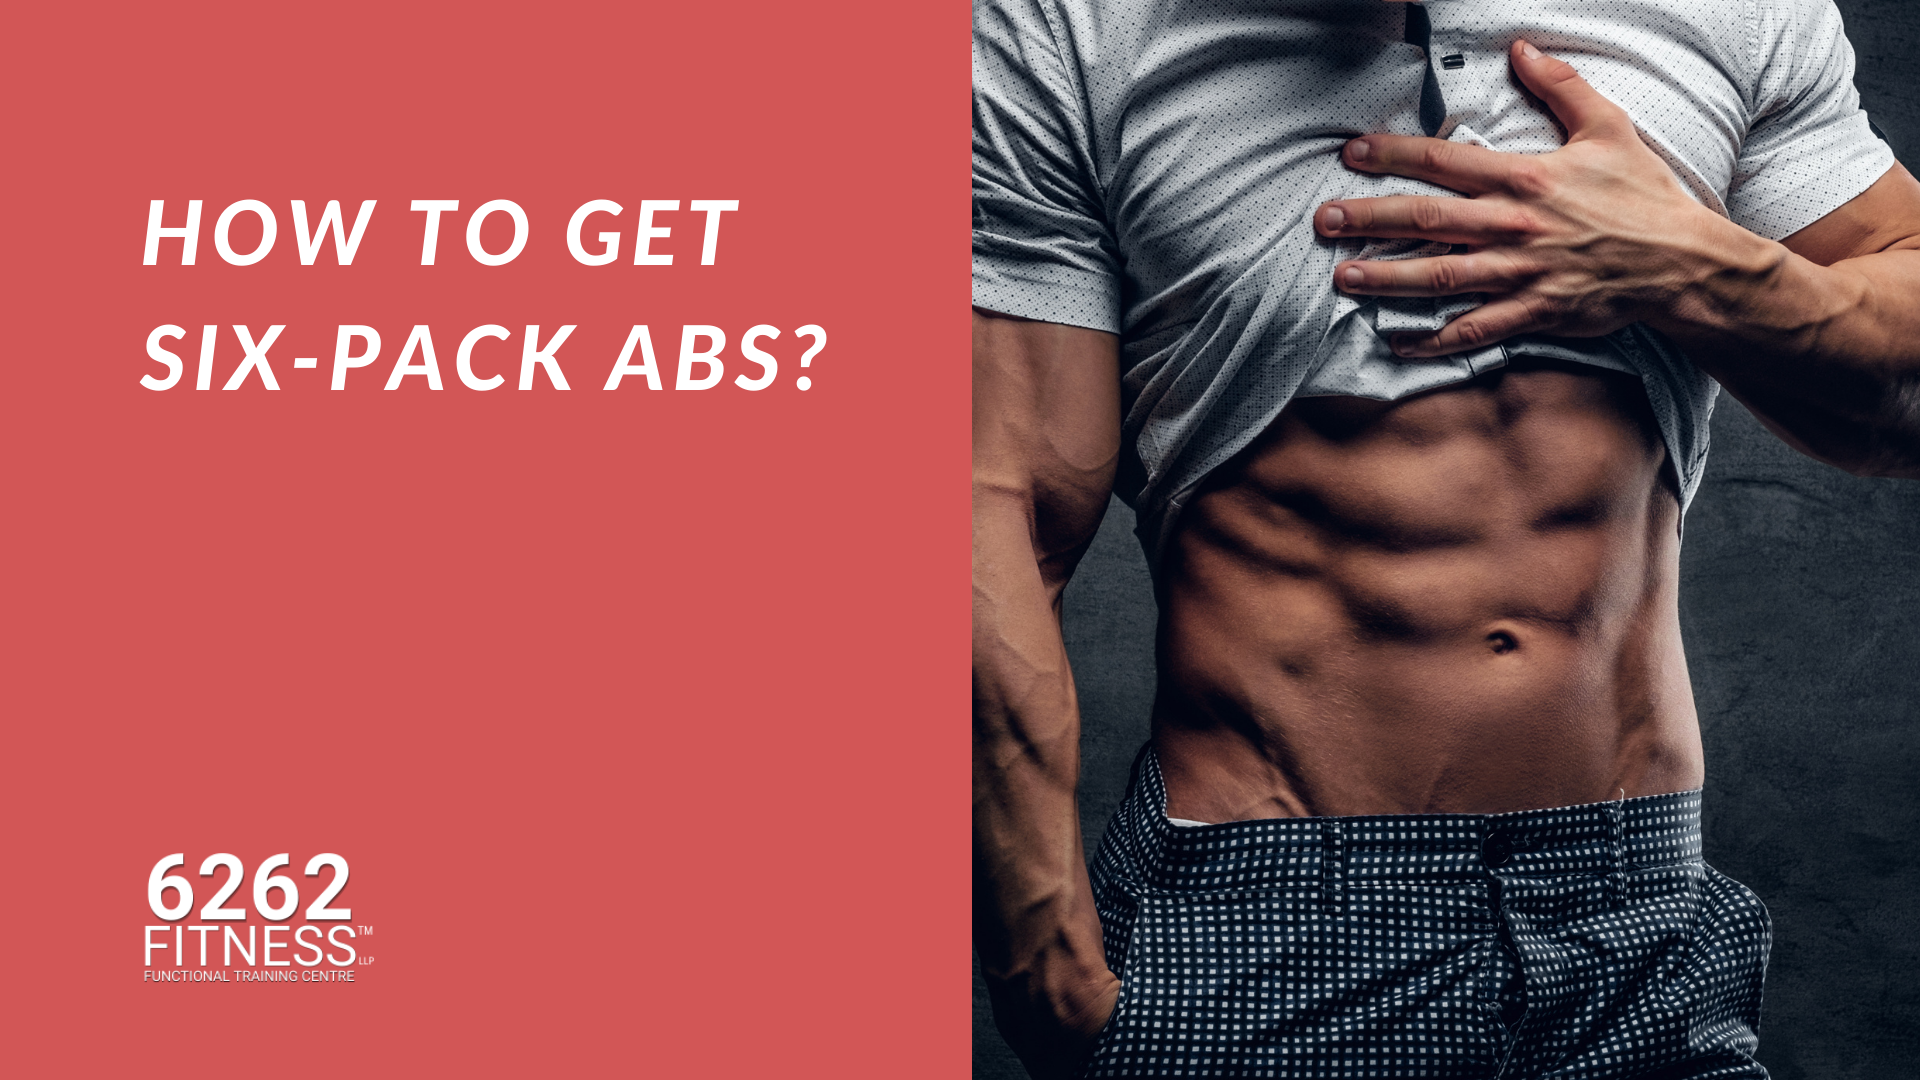 How to get six-pack abs?